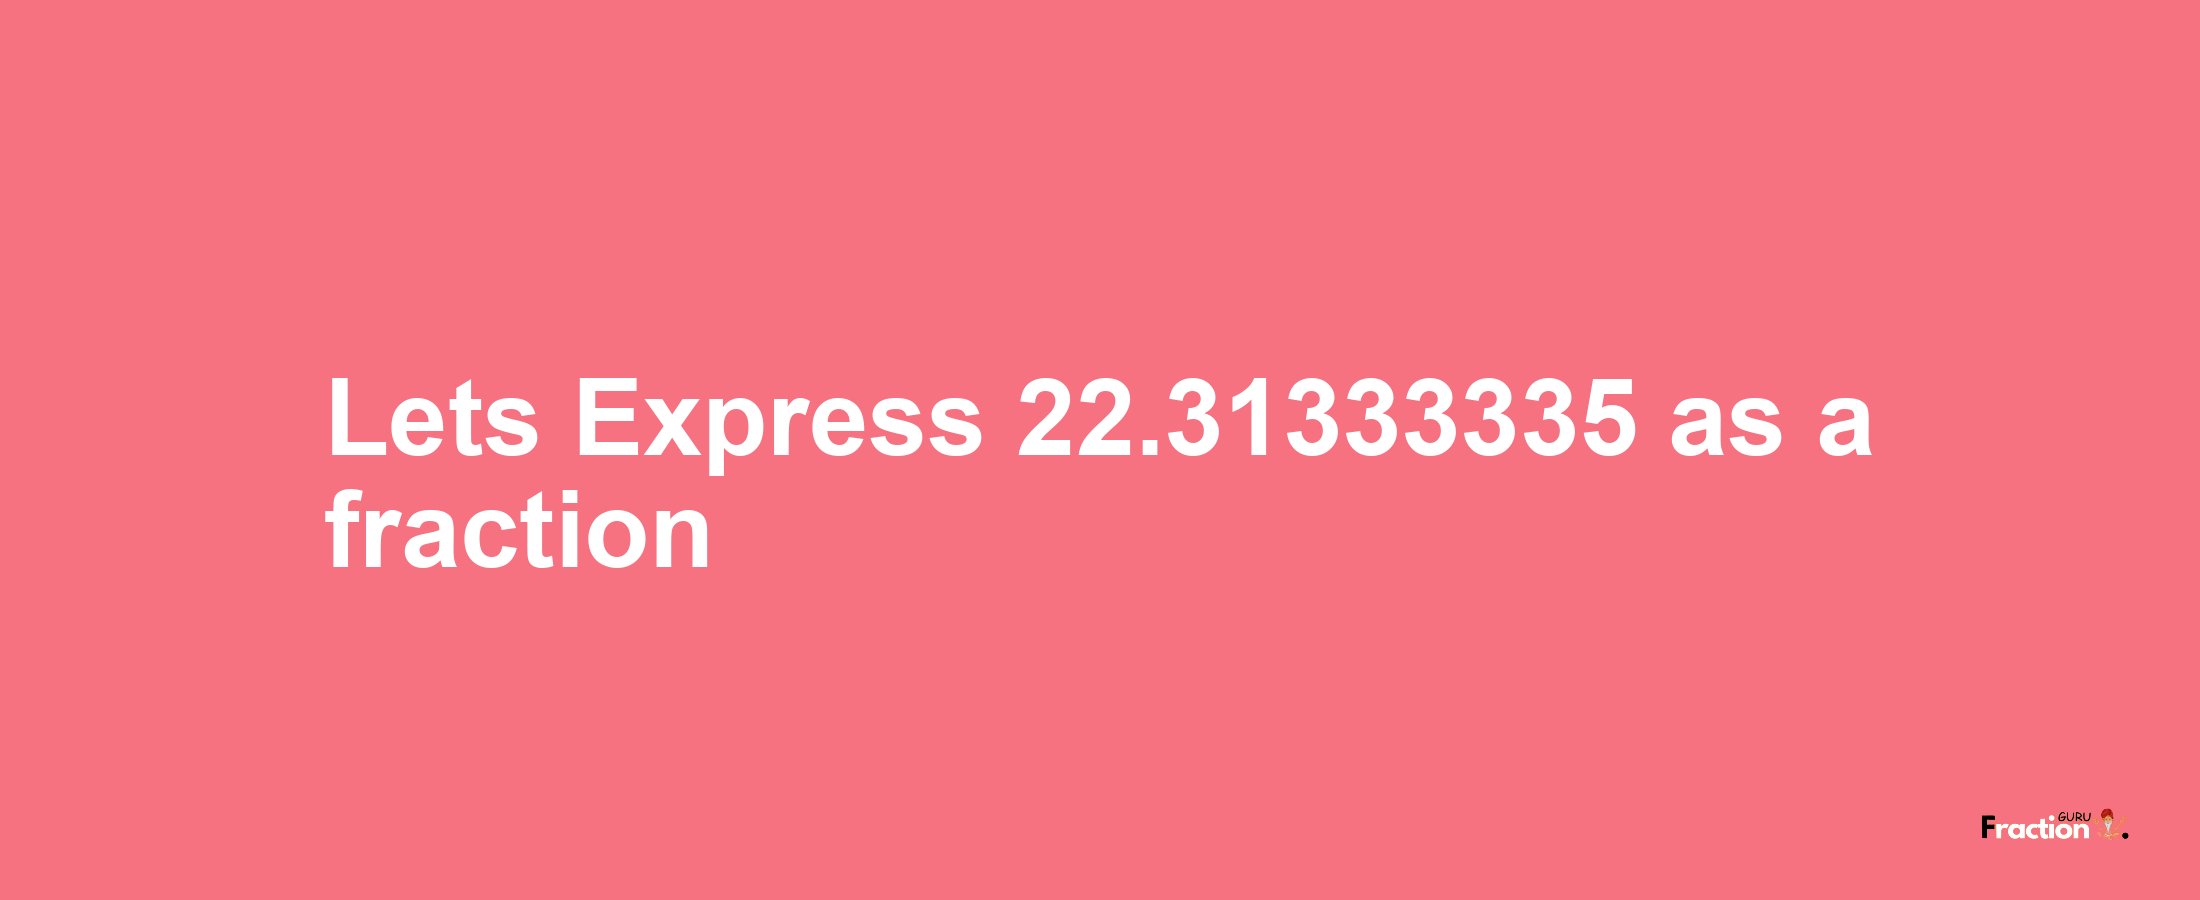 Lets Express 22.31333335 as afraction